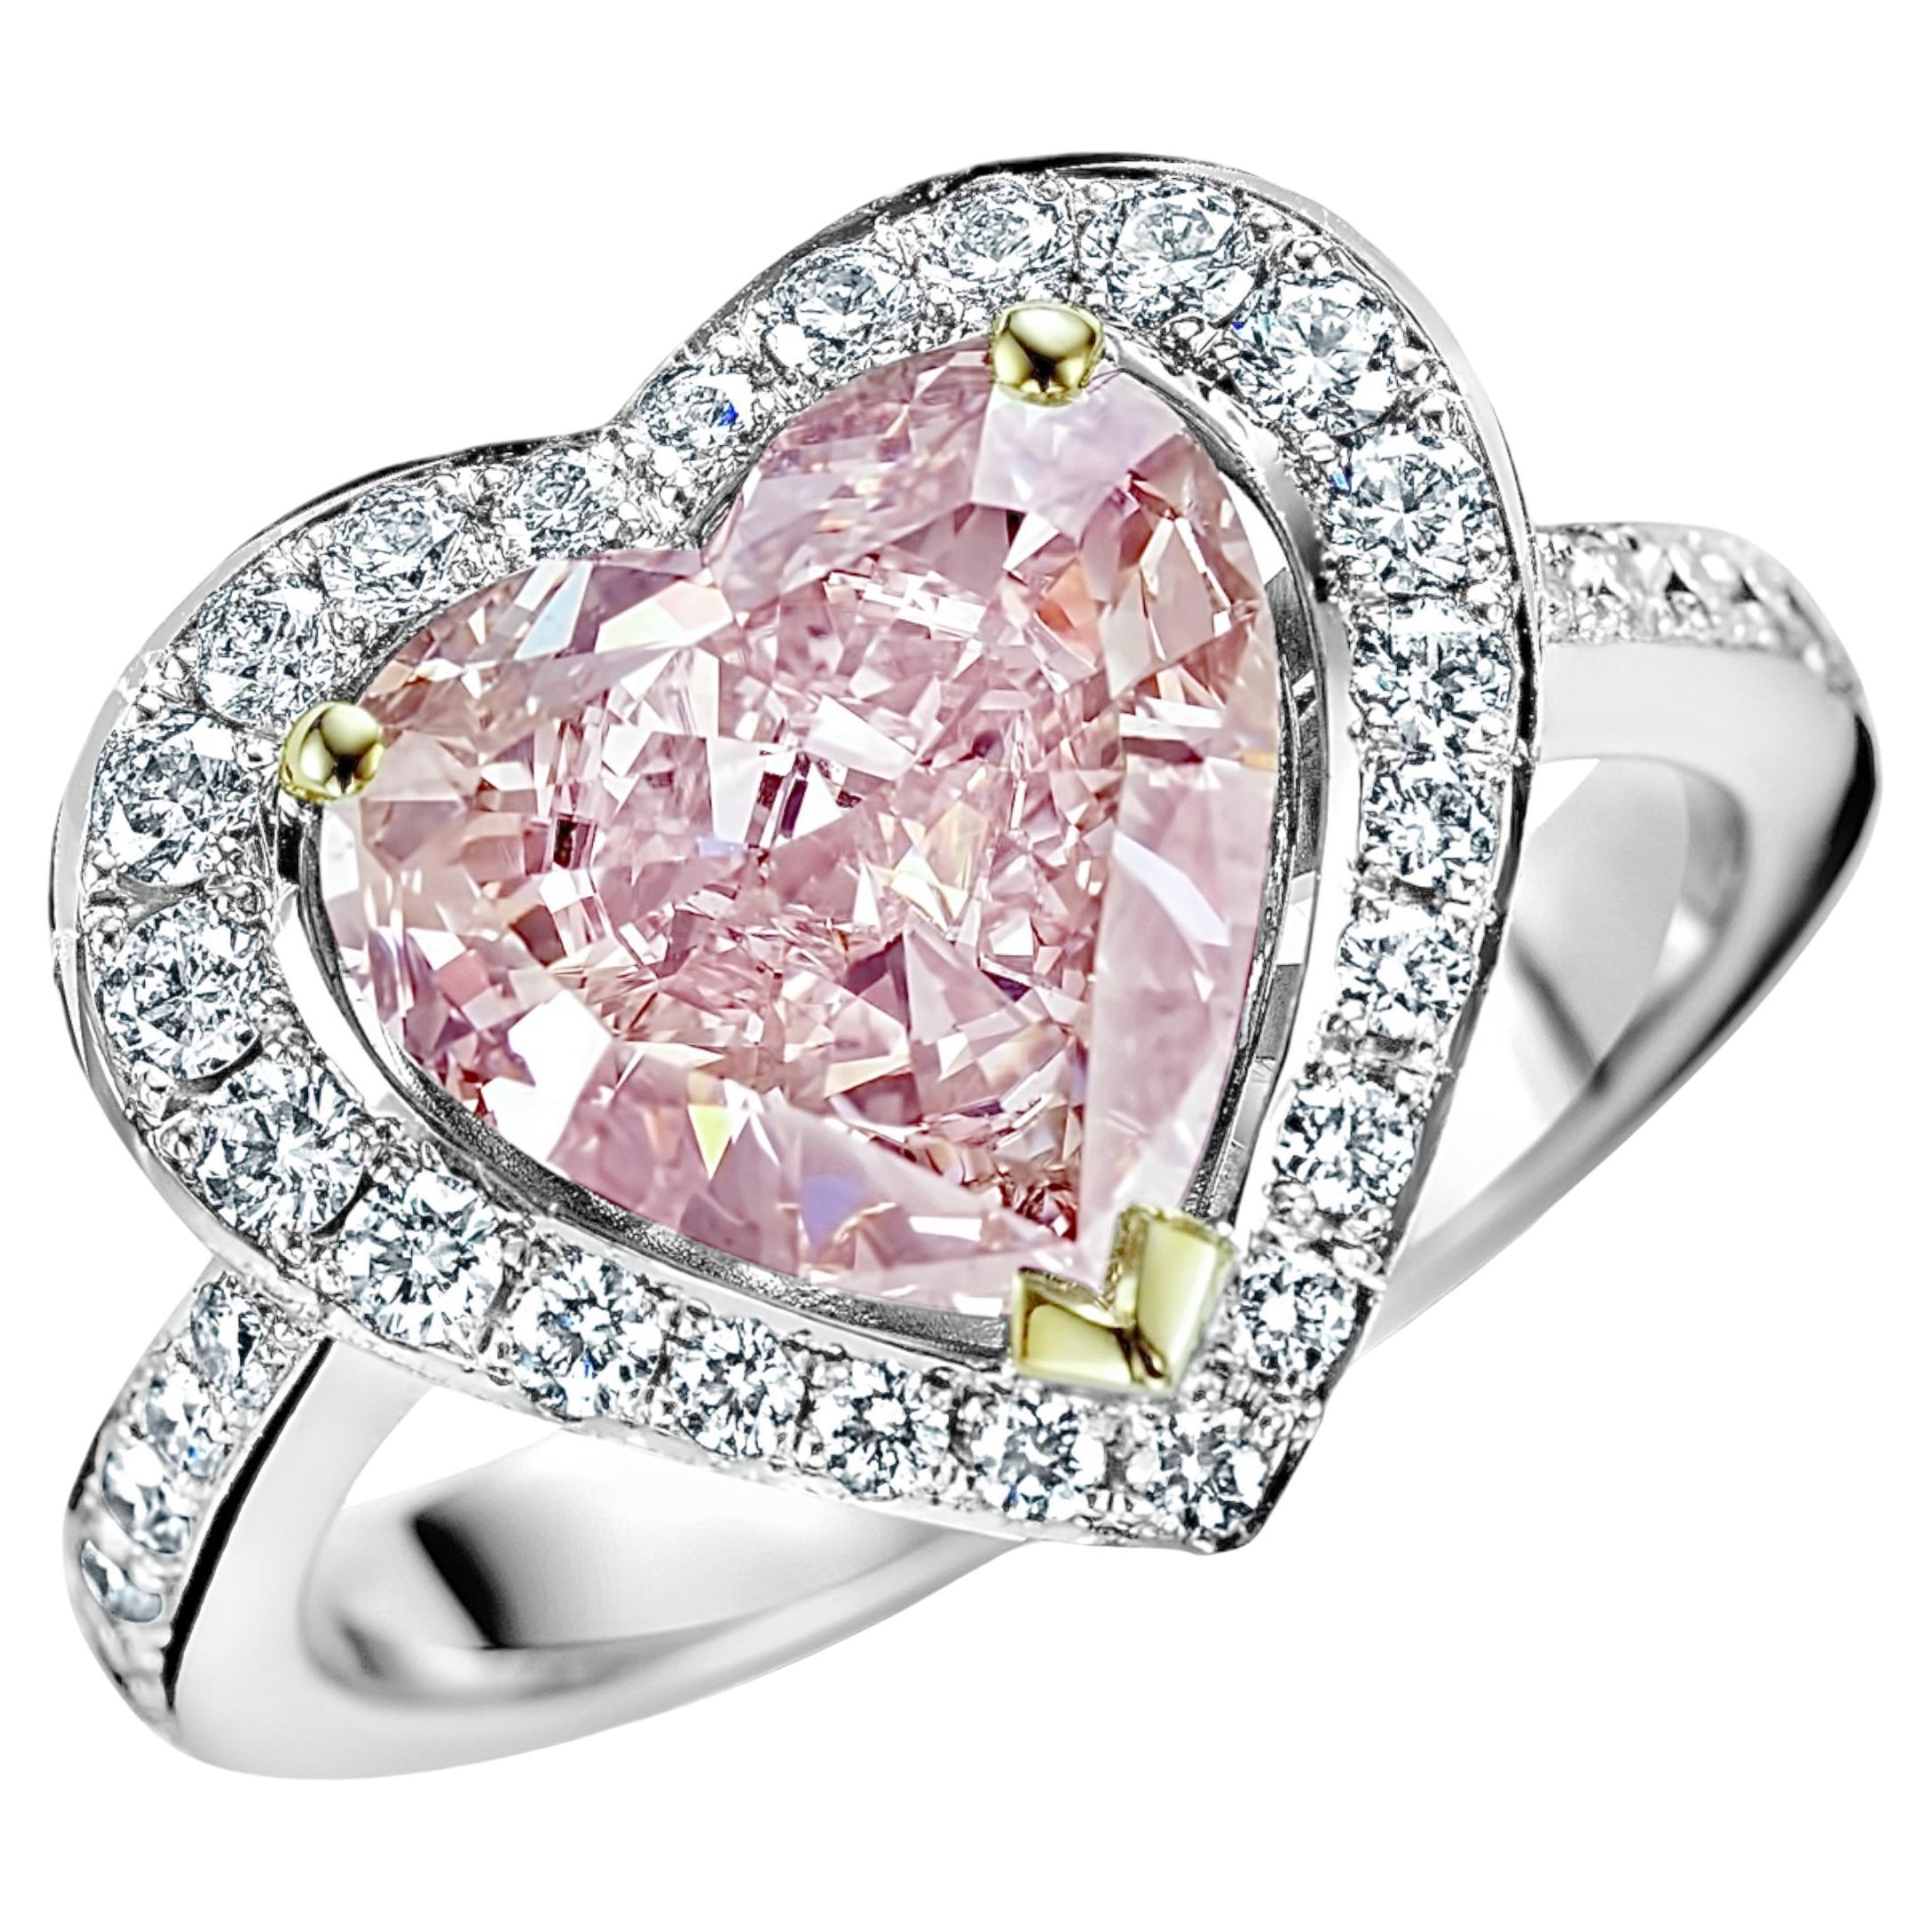 18 kt. White Gold Enhanced Pink Diamond Heart 2.78 ct. Ring, GIA Certificate For Sale